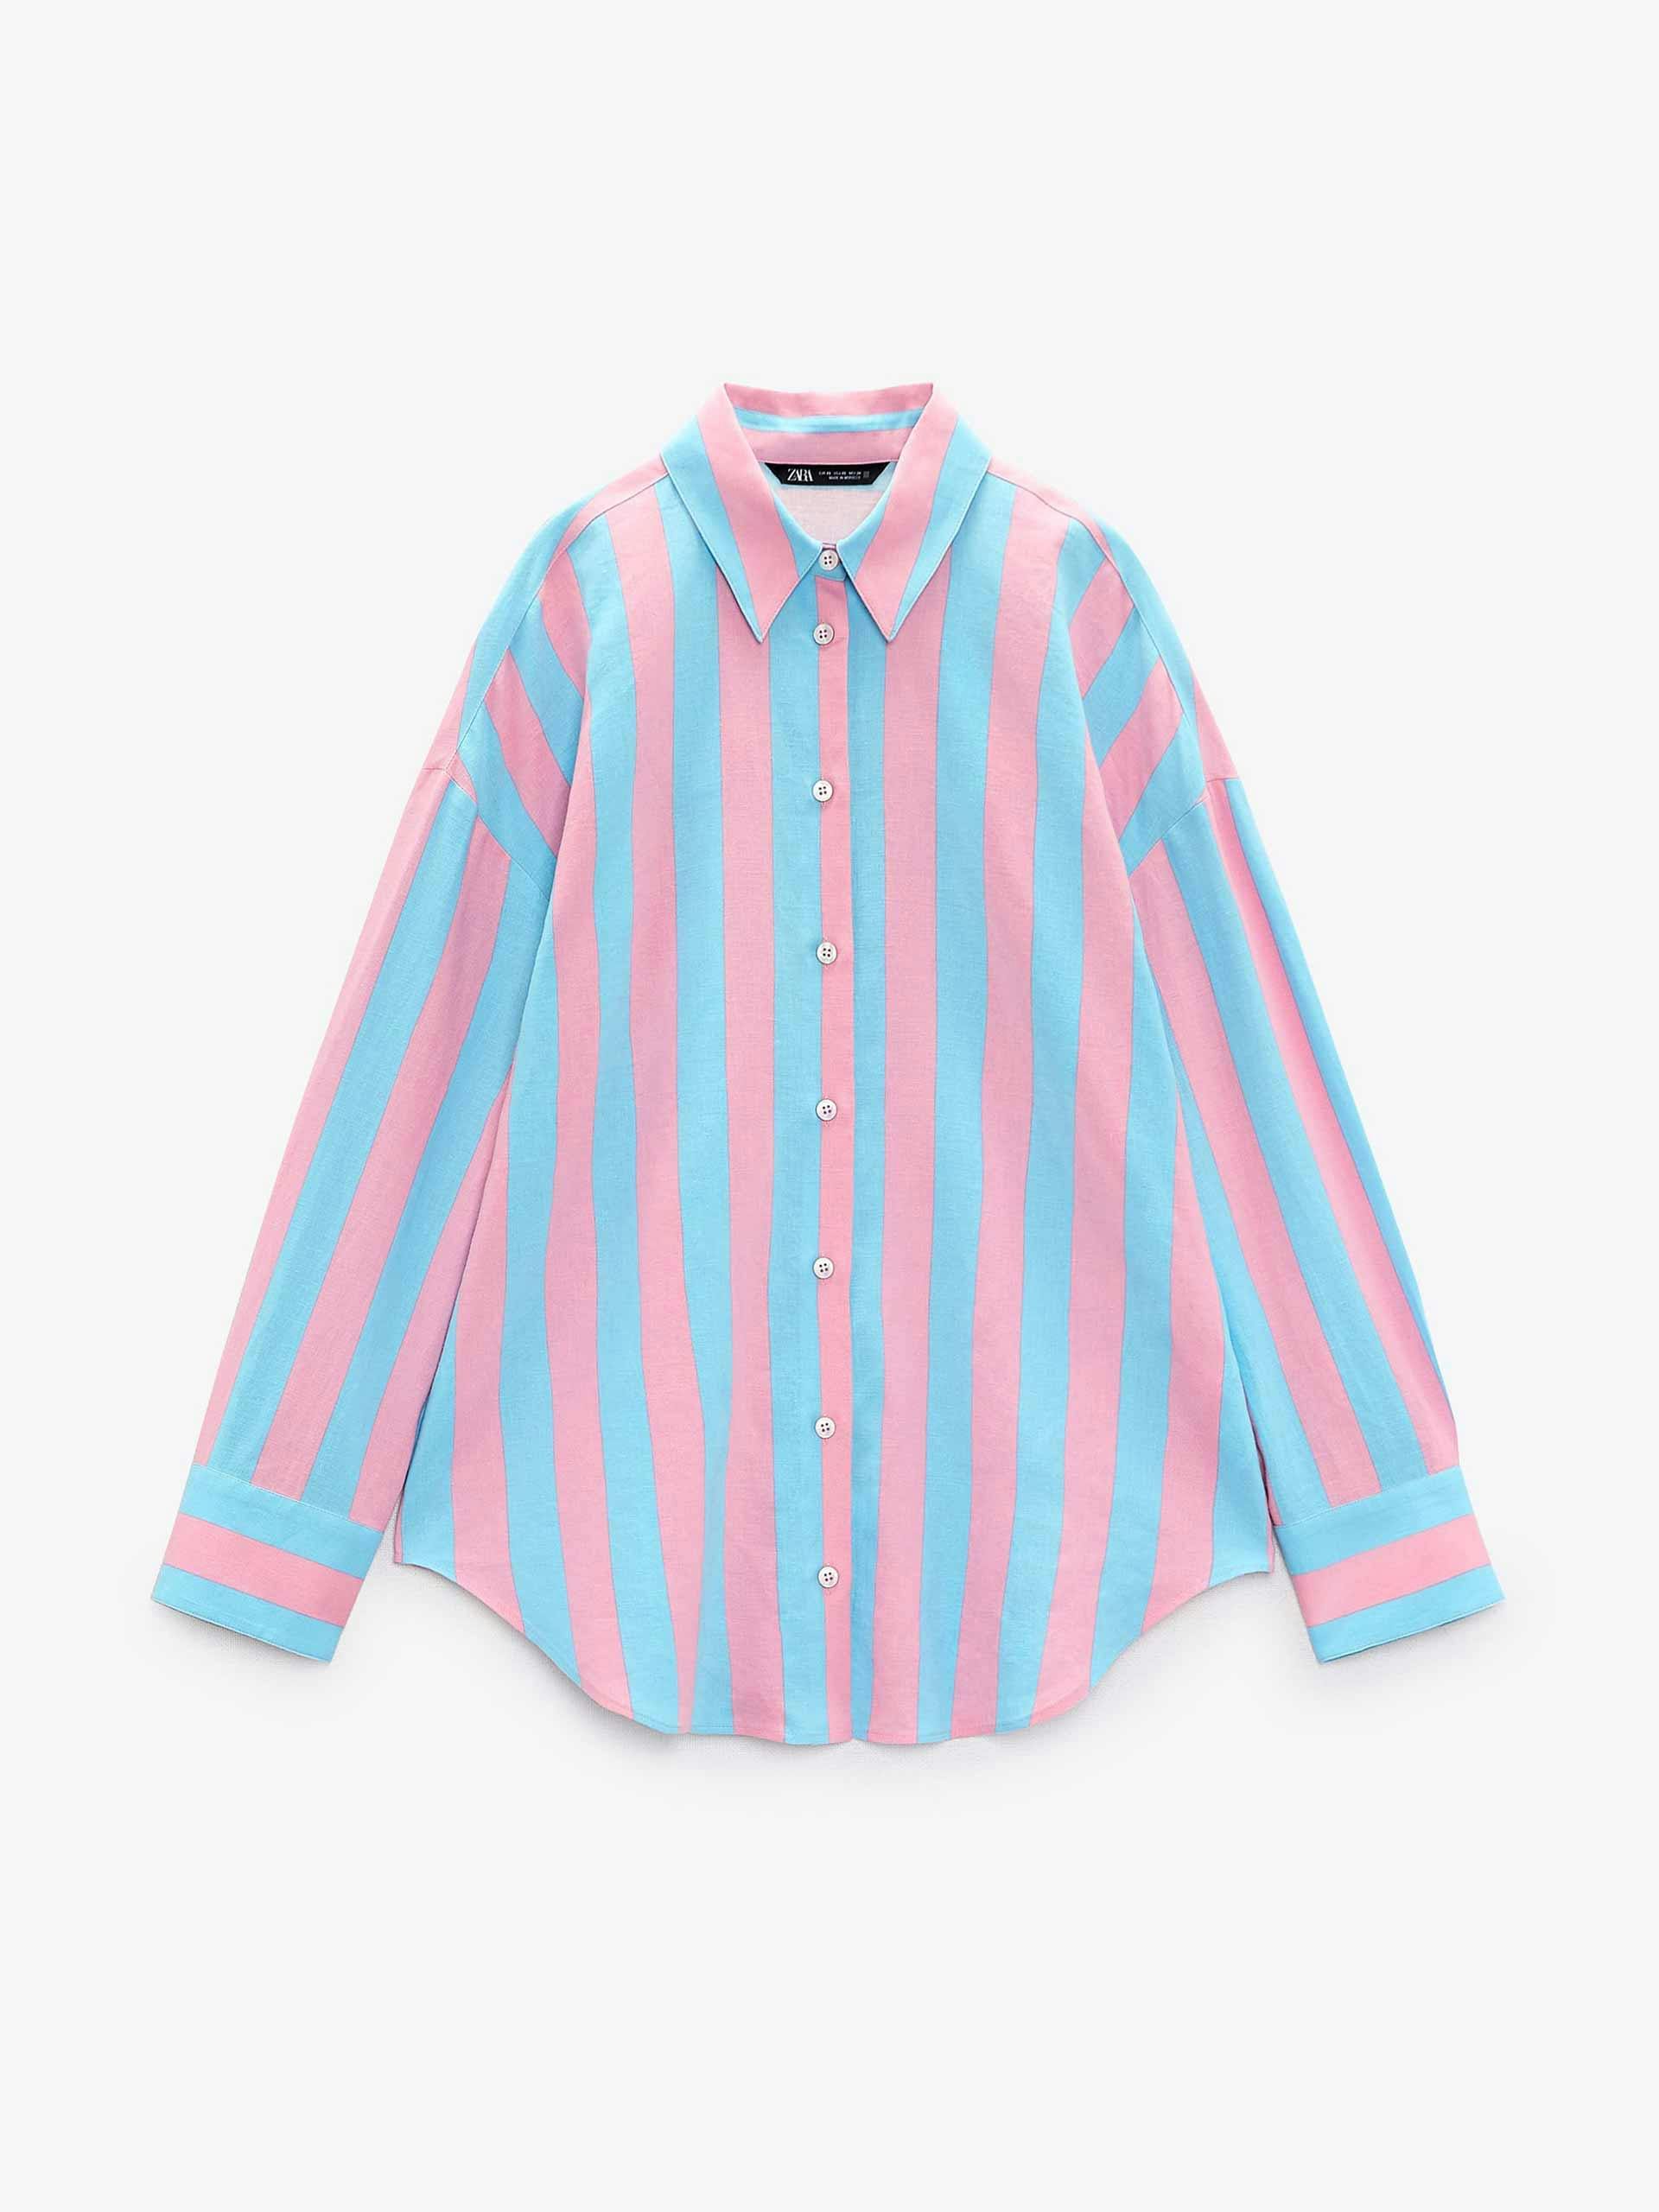 Pink and blue stripe shirt